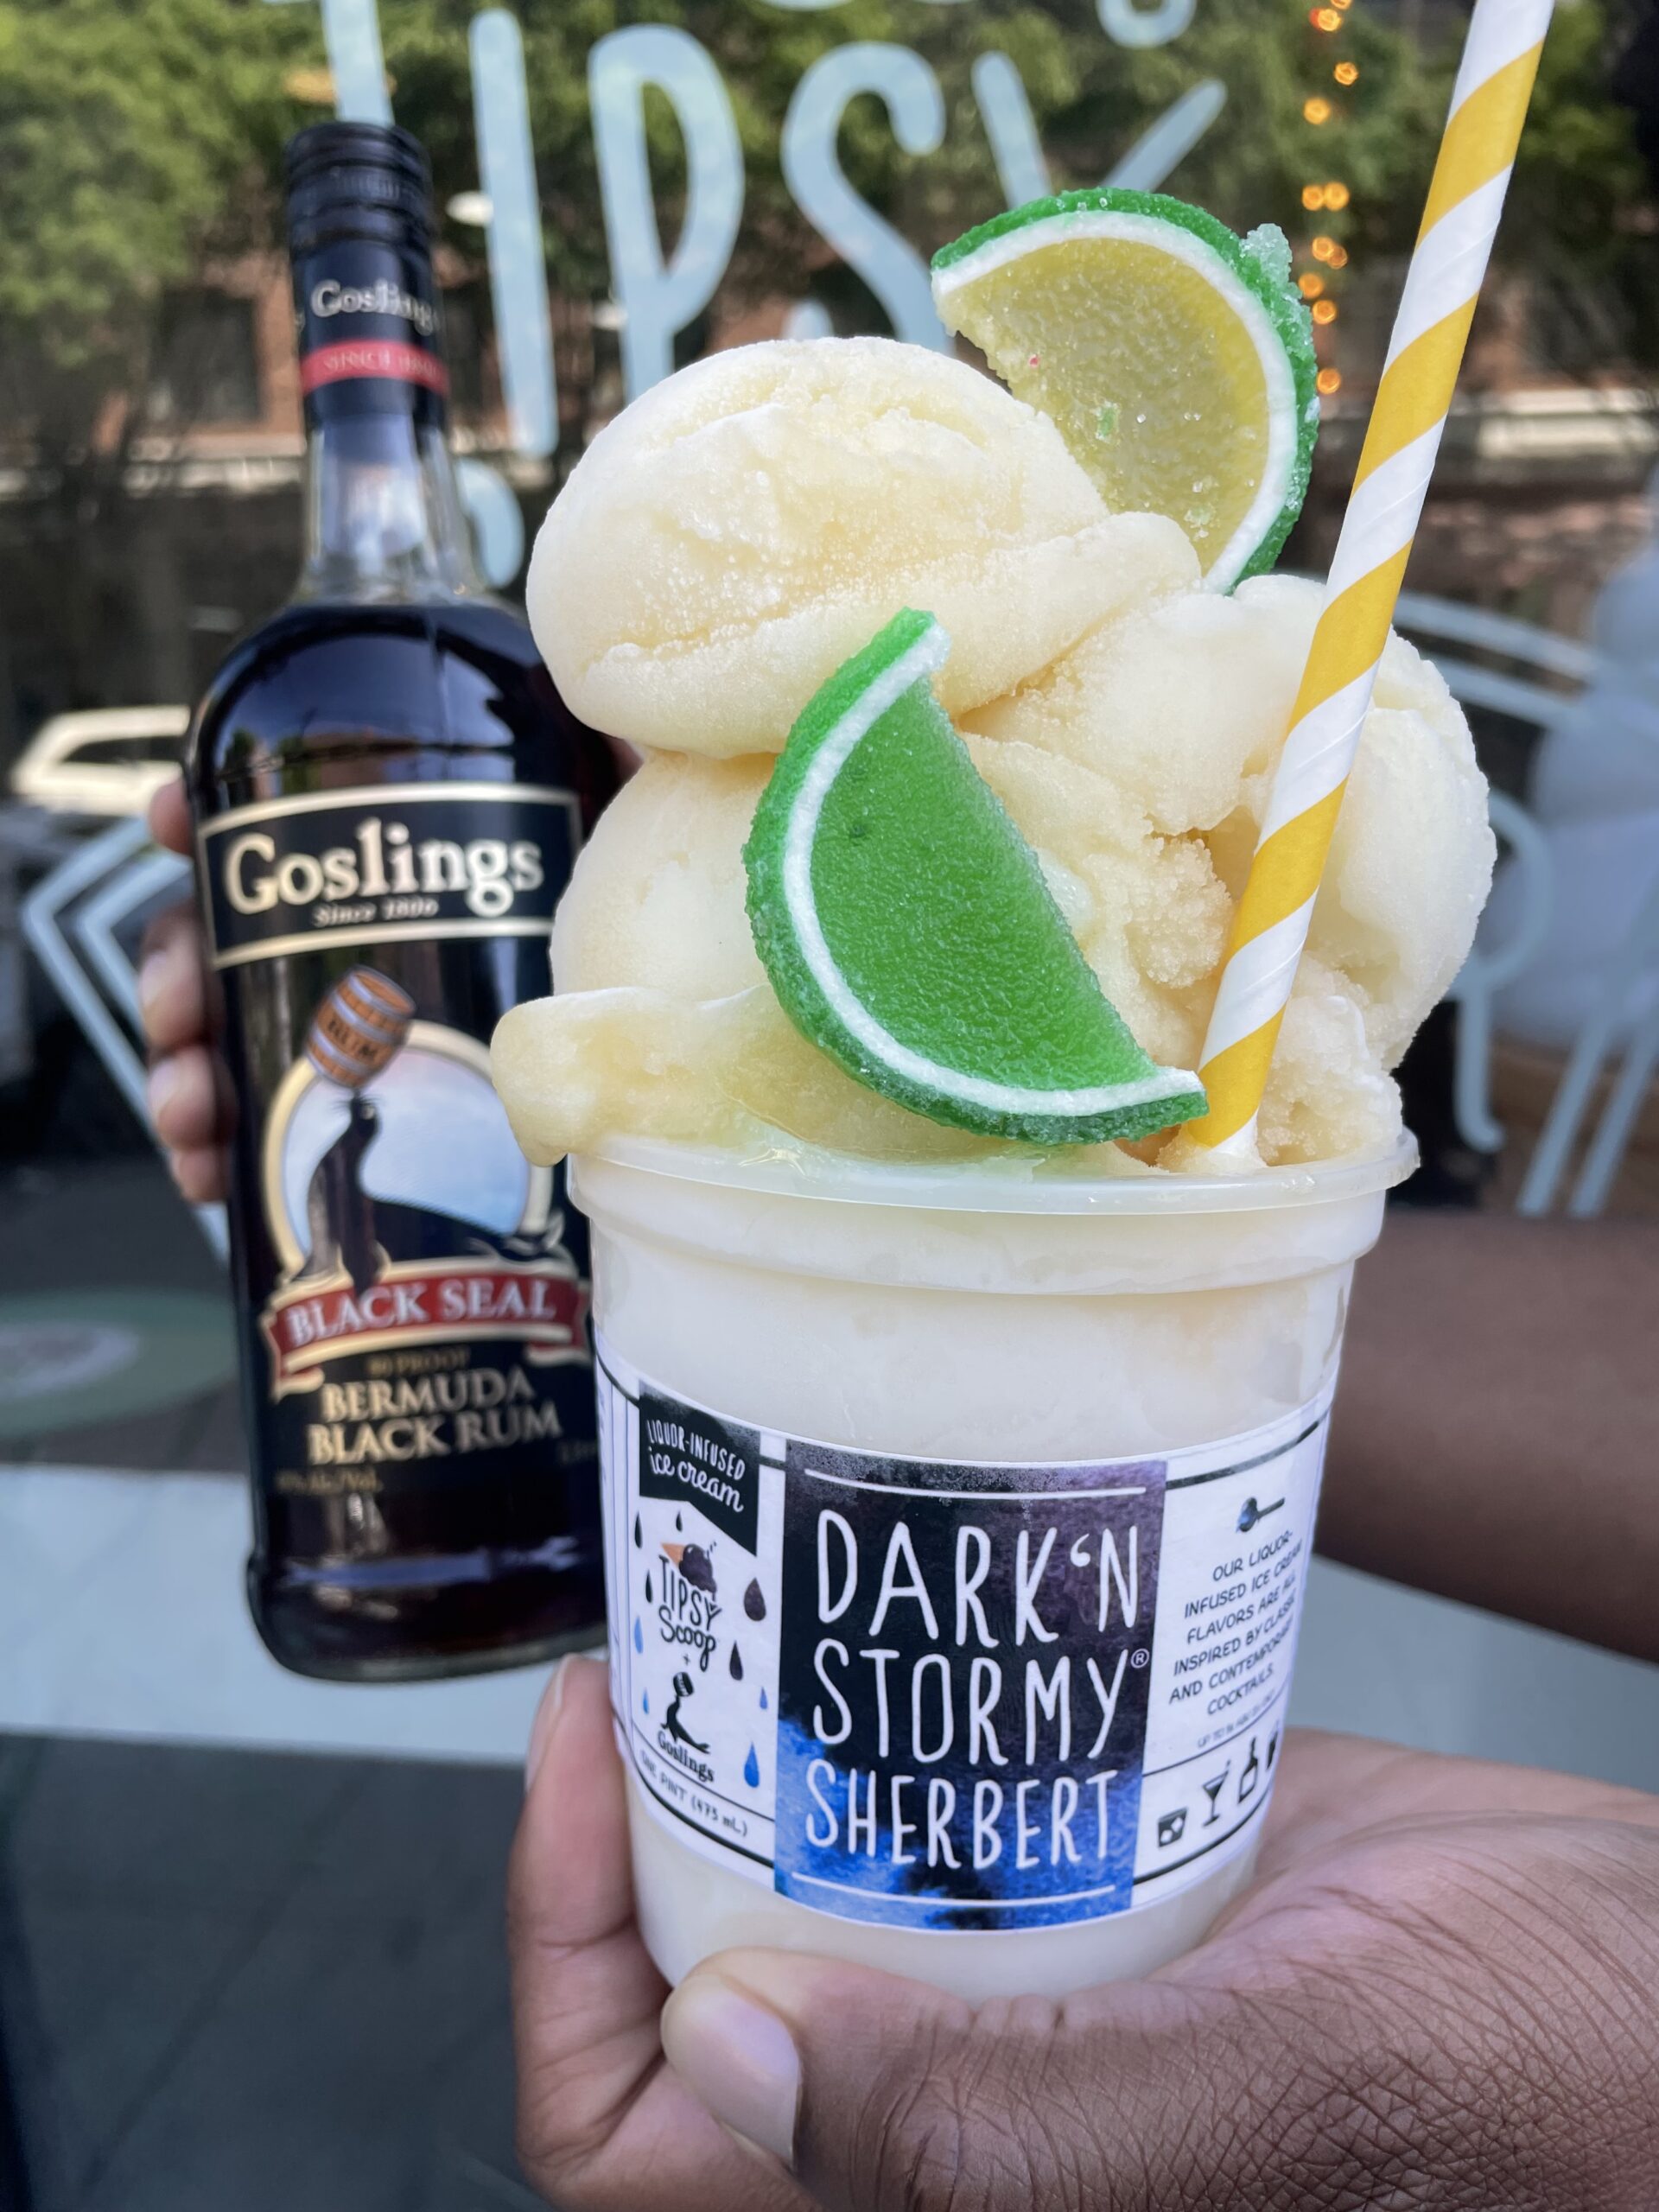 National Dark 'n Stormy® Day celebration Goslings Dark 'n Stormy® Sherbert launch Tipsy Scoop ice cream collaboration Boozy frozen treats Free ice cream giveaway Limited edition sherbert Goslings Rum new release Tipsy Scoop Barlour locations Summer cocktail desserts Frozen Dark 'n Stormy® June 9th special event Goldbelly nationwide shipping Goslings Rum history Tipsy Scoop franchise expansion Summer 2024 food trends